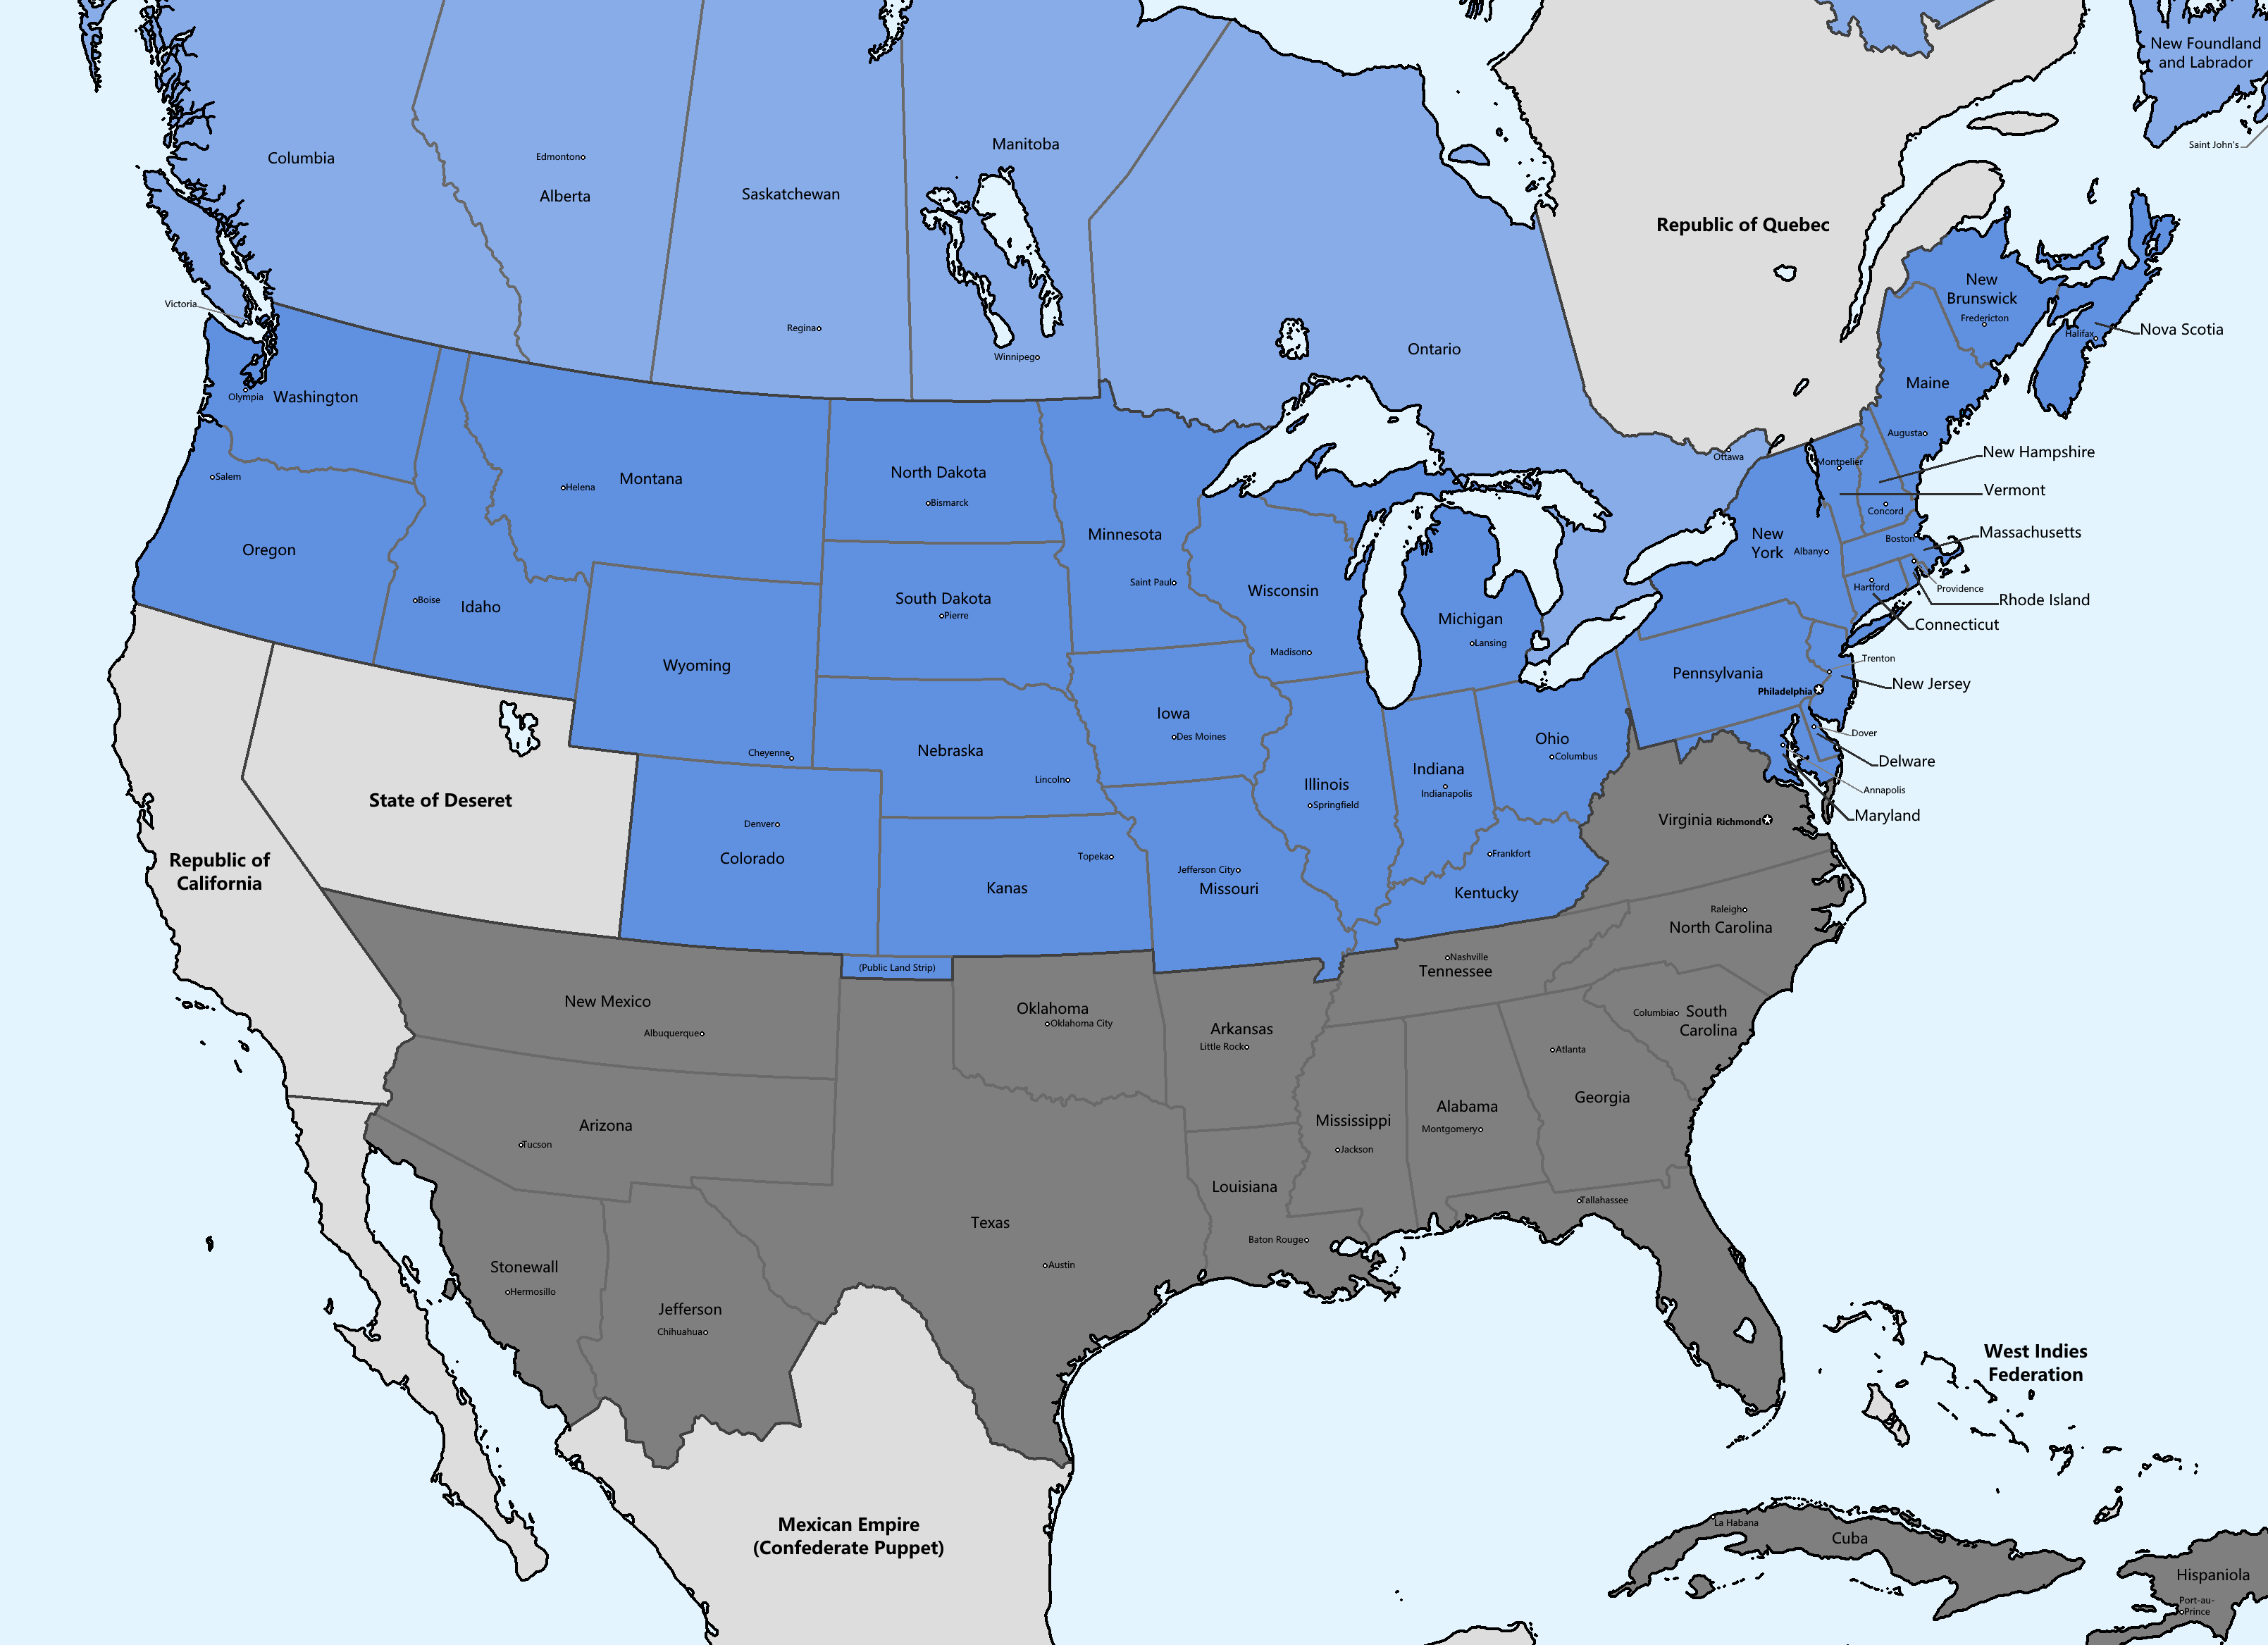 A_House_Divided_United_States_and_Confederate_States_Finished_Map.png